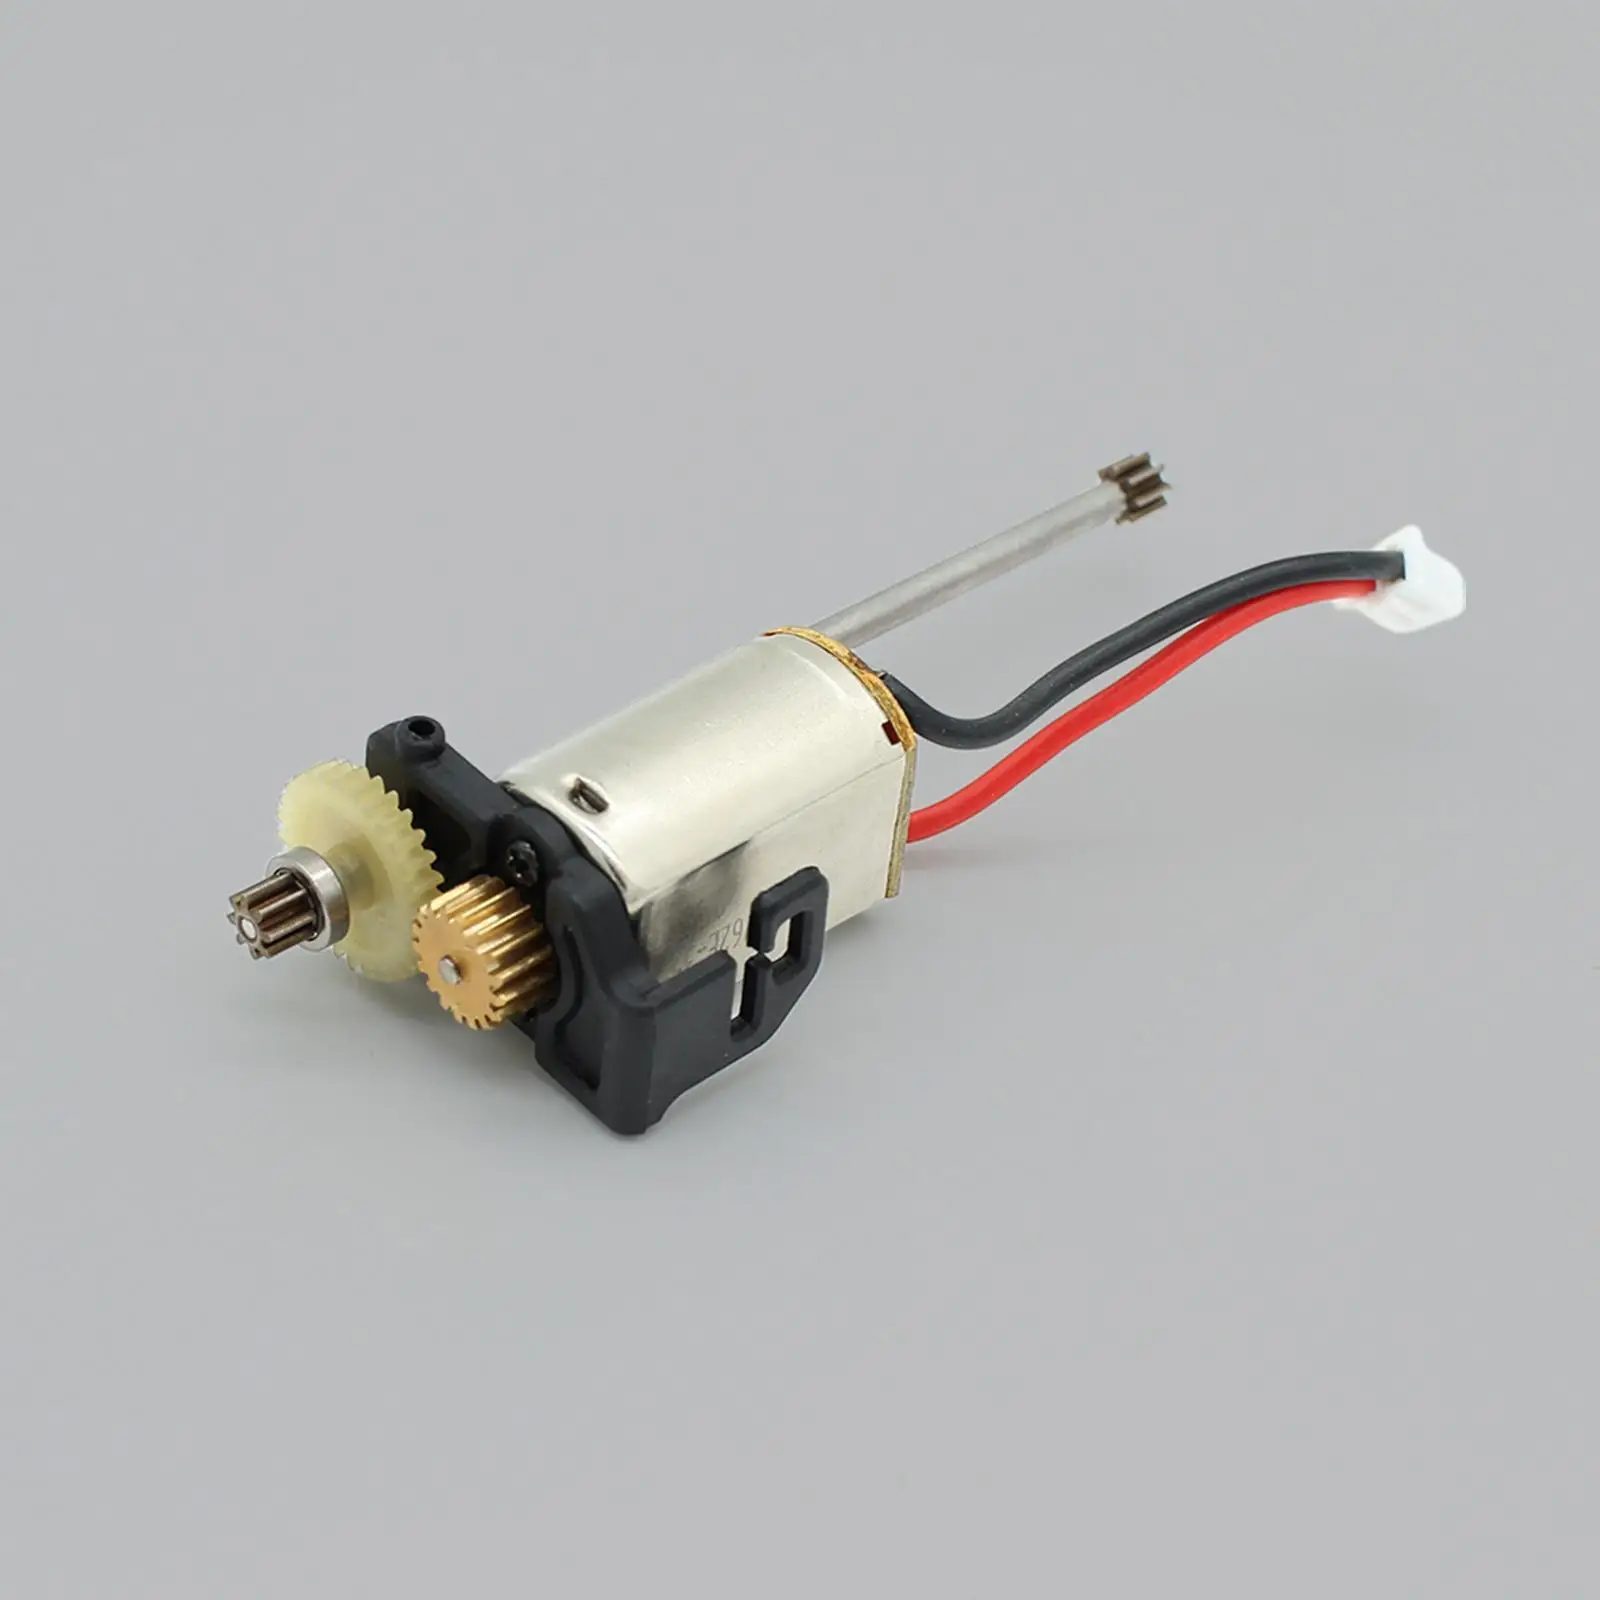 RC Metal Motor Upgrade Parts Spare Parts Professional Lightweight RC Accessory for Wltoys 1/28 K989 284010 K969 Accessories